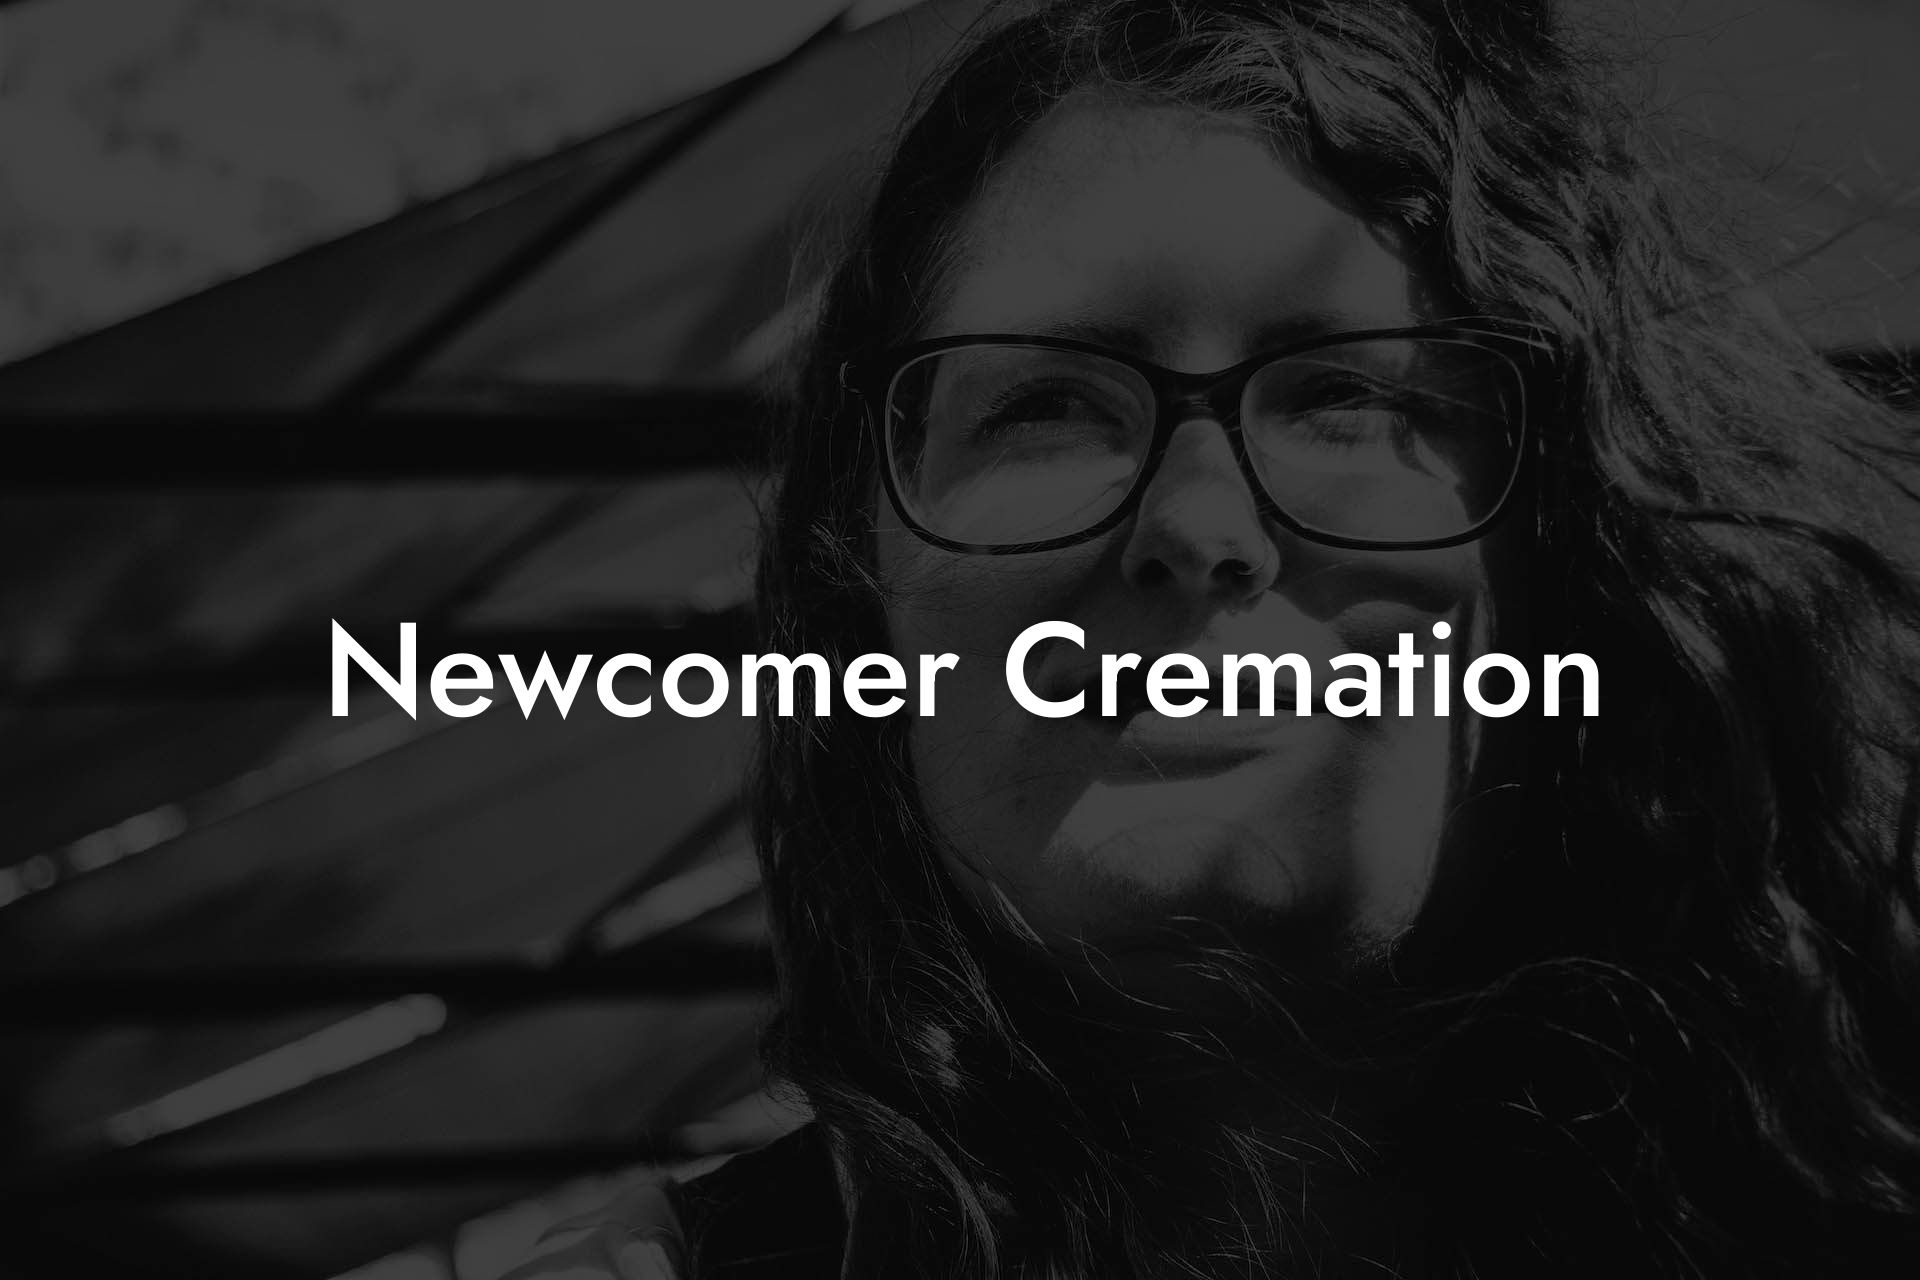 Newcomer Cremation